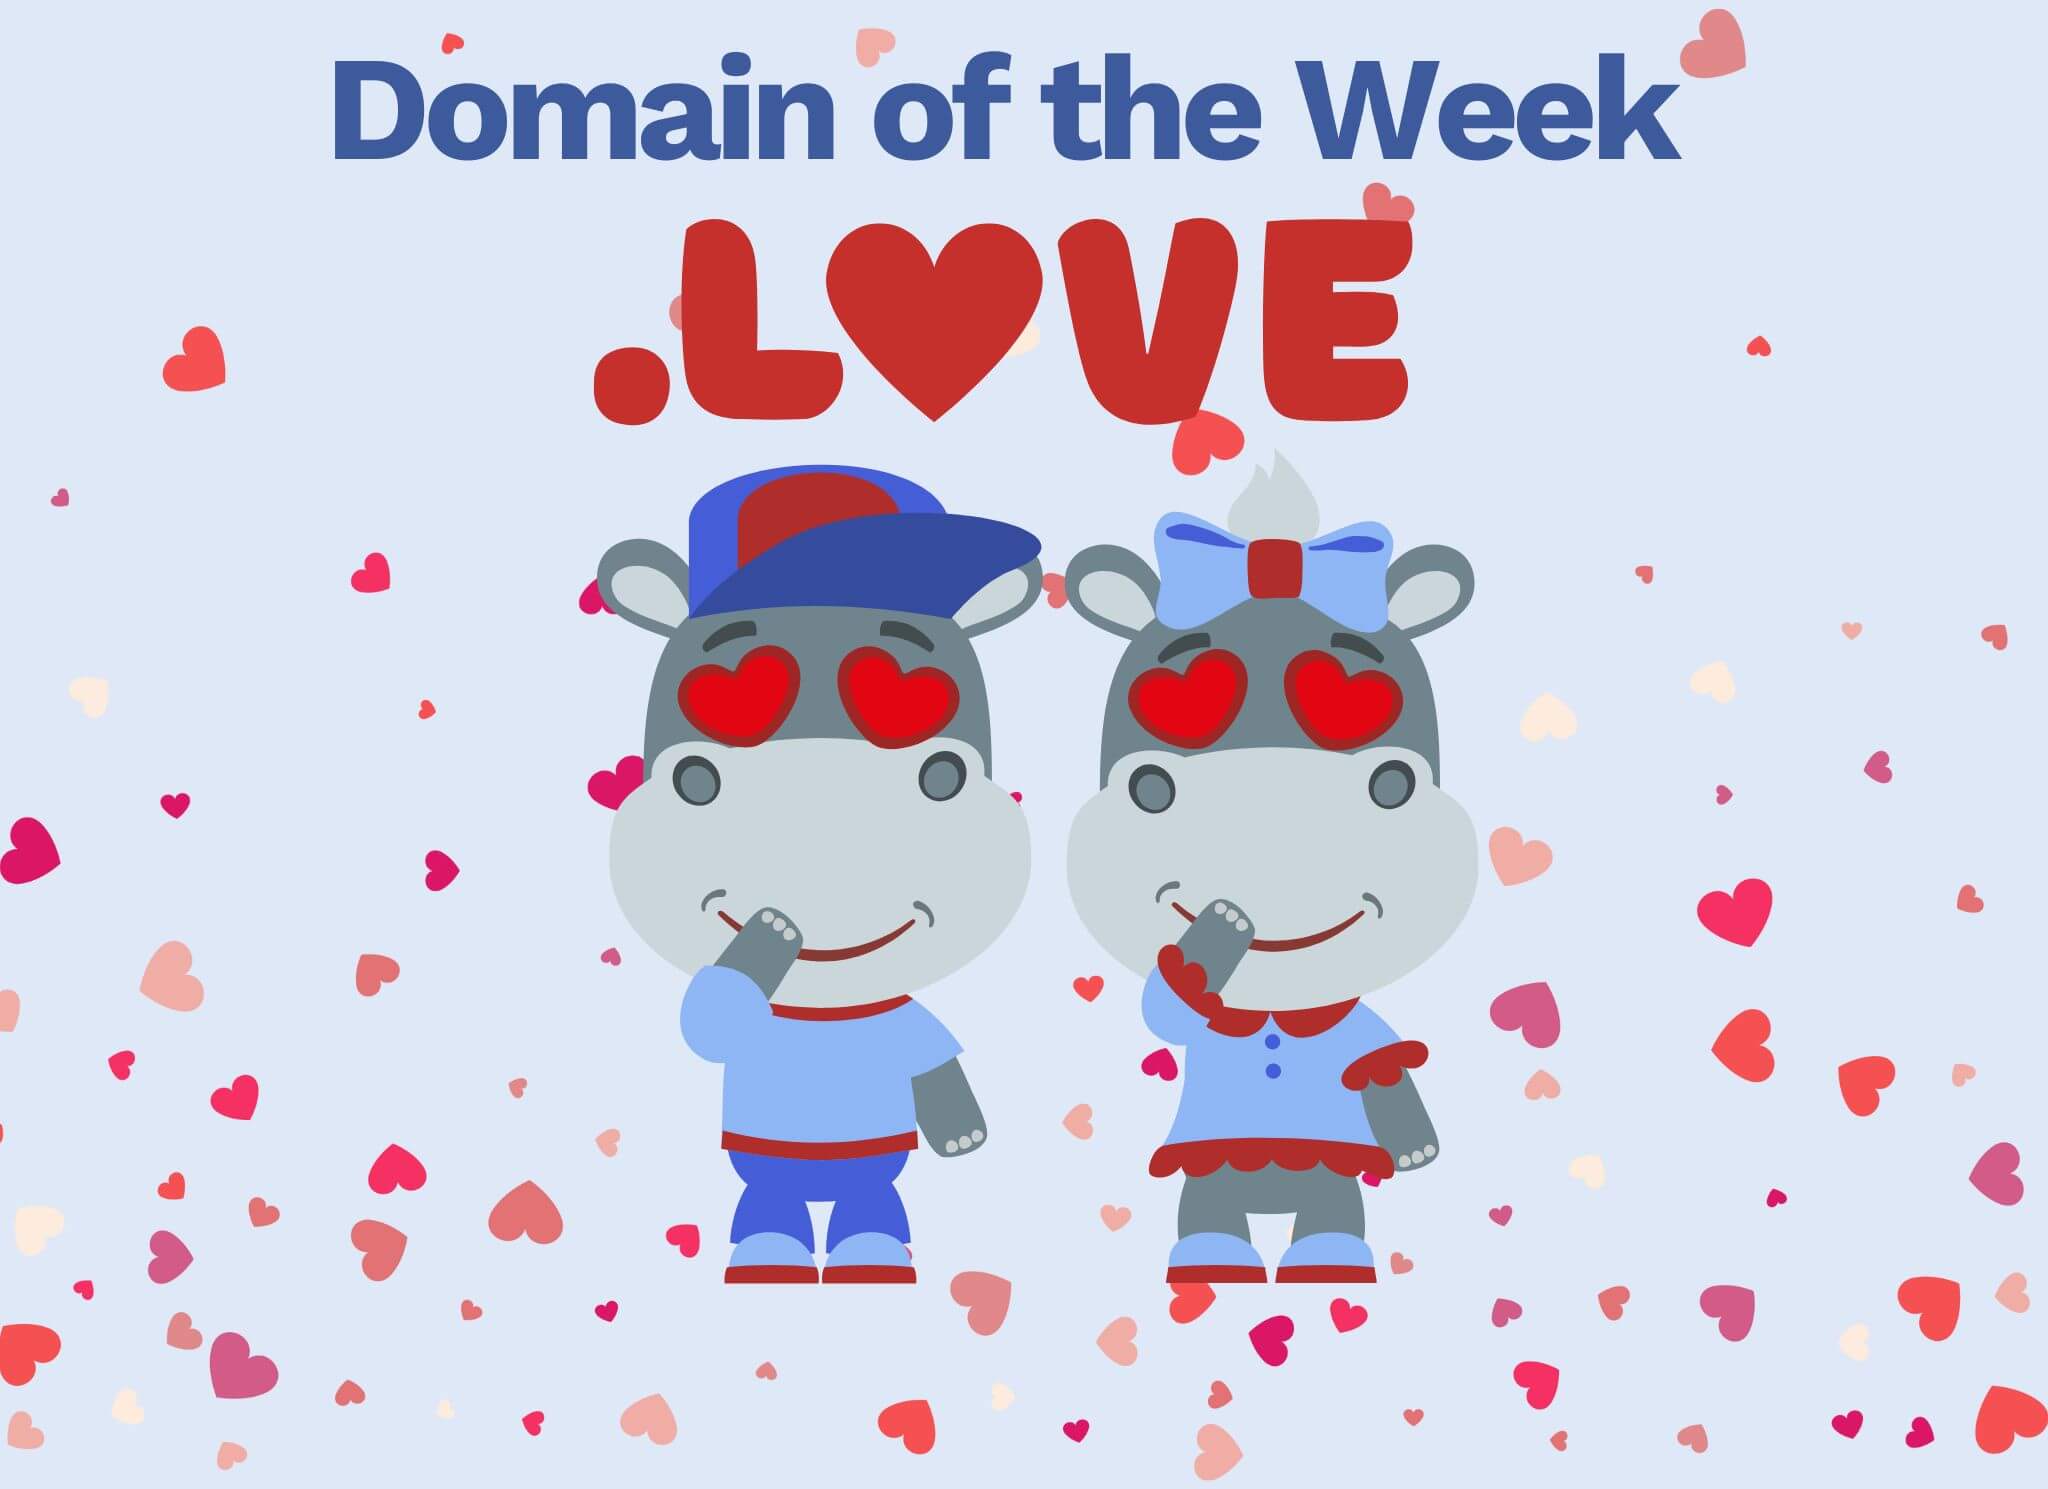 Domain of the Week. A .love domain from Hipposerve